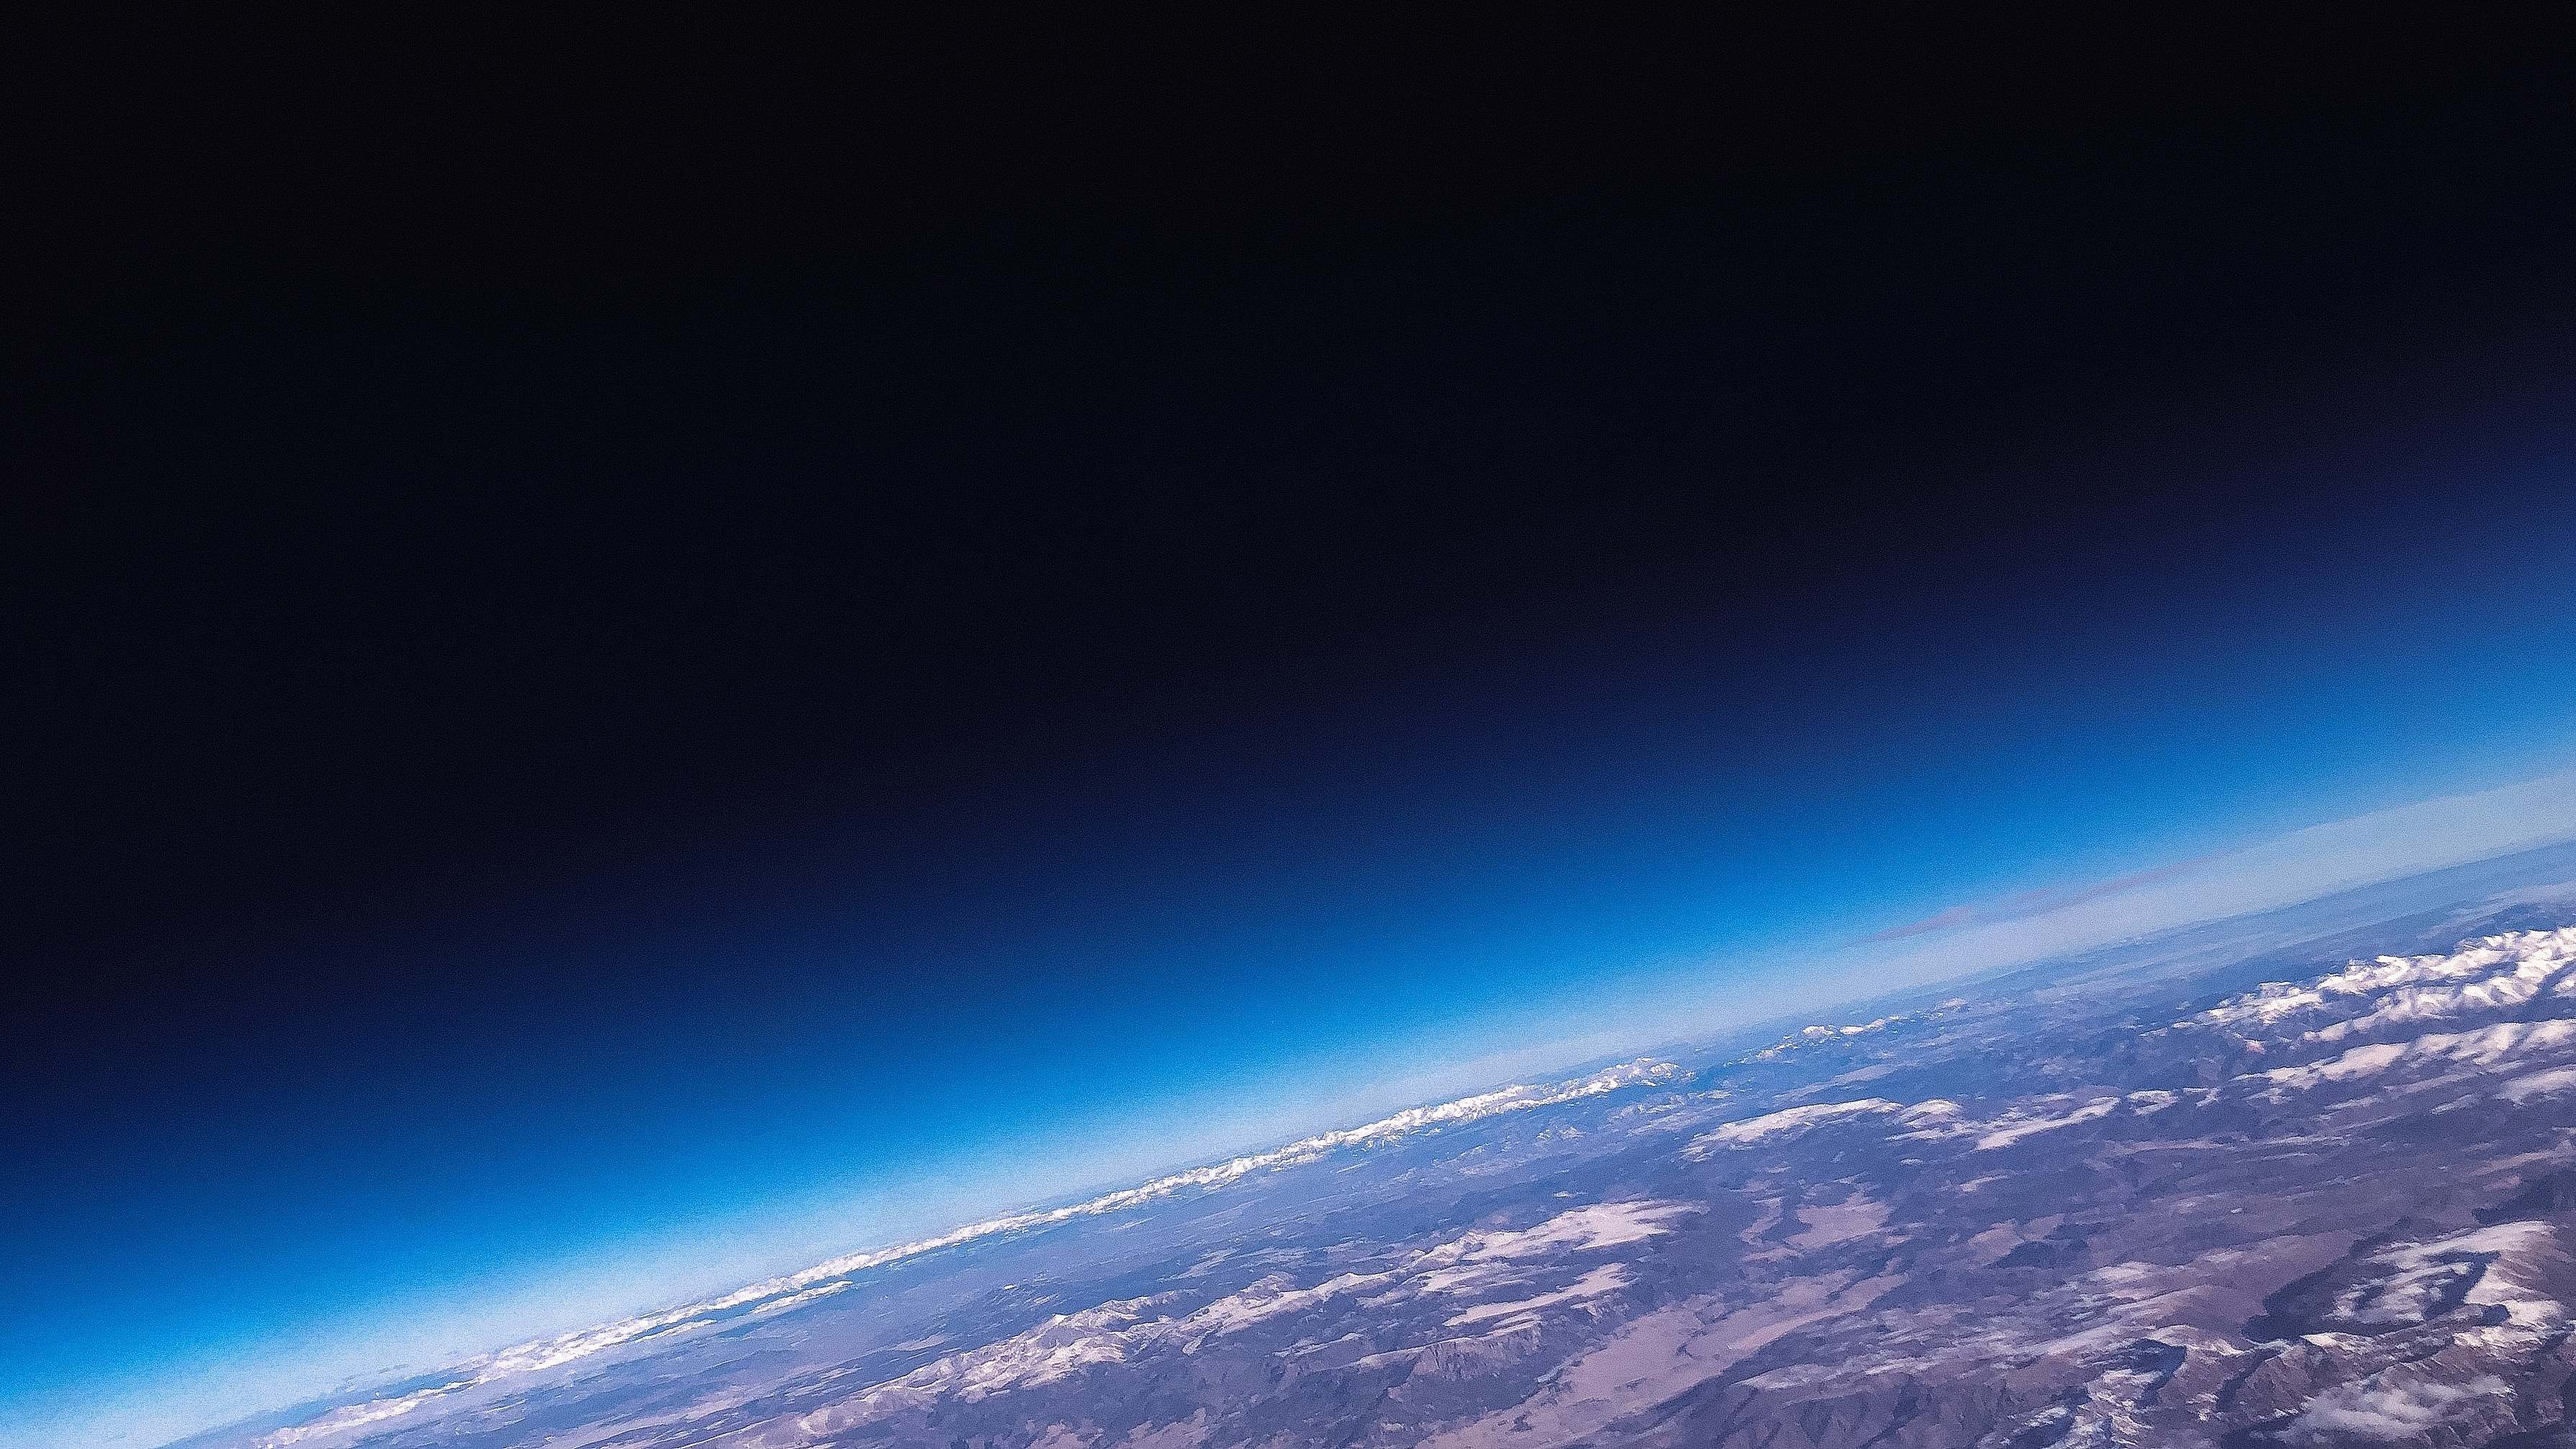 Earth Outer Space Photography Of Earth Sphere Image Free Stock Photo